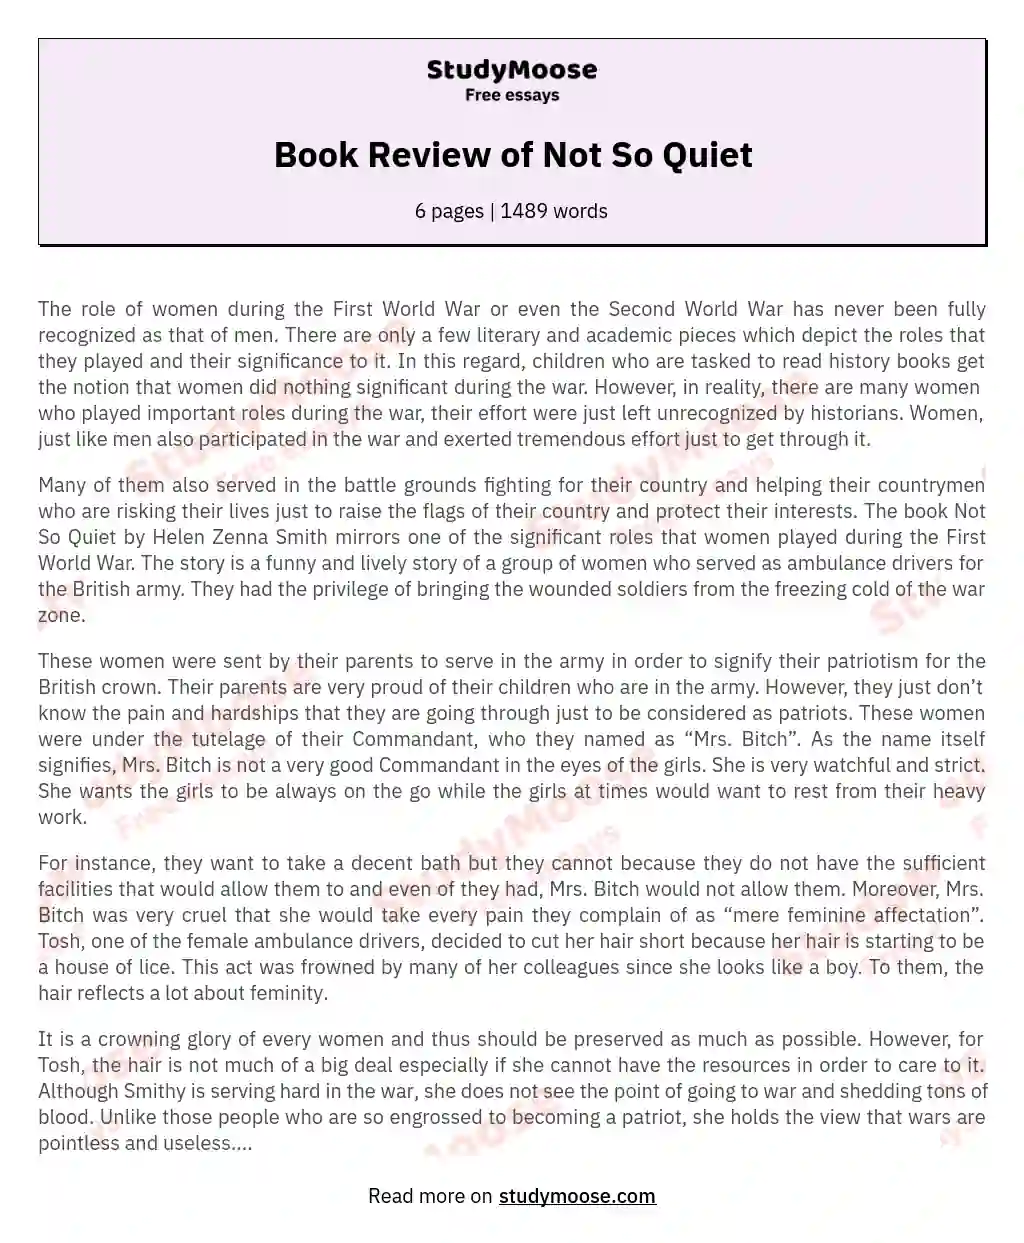 Book Review of Not So Quiet essay